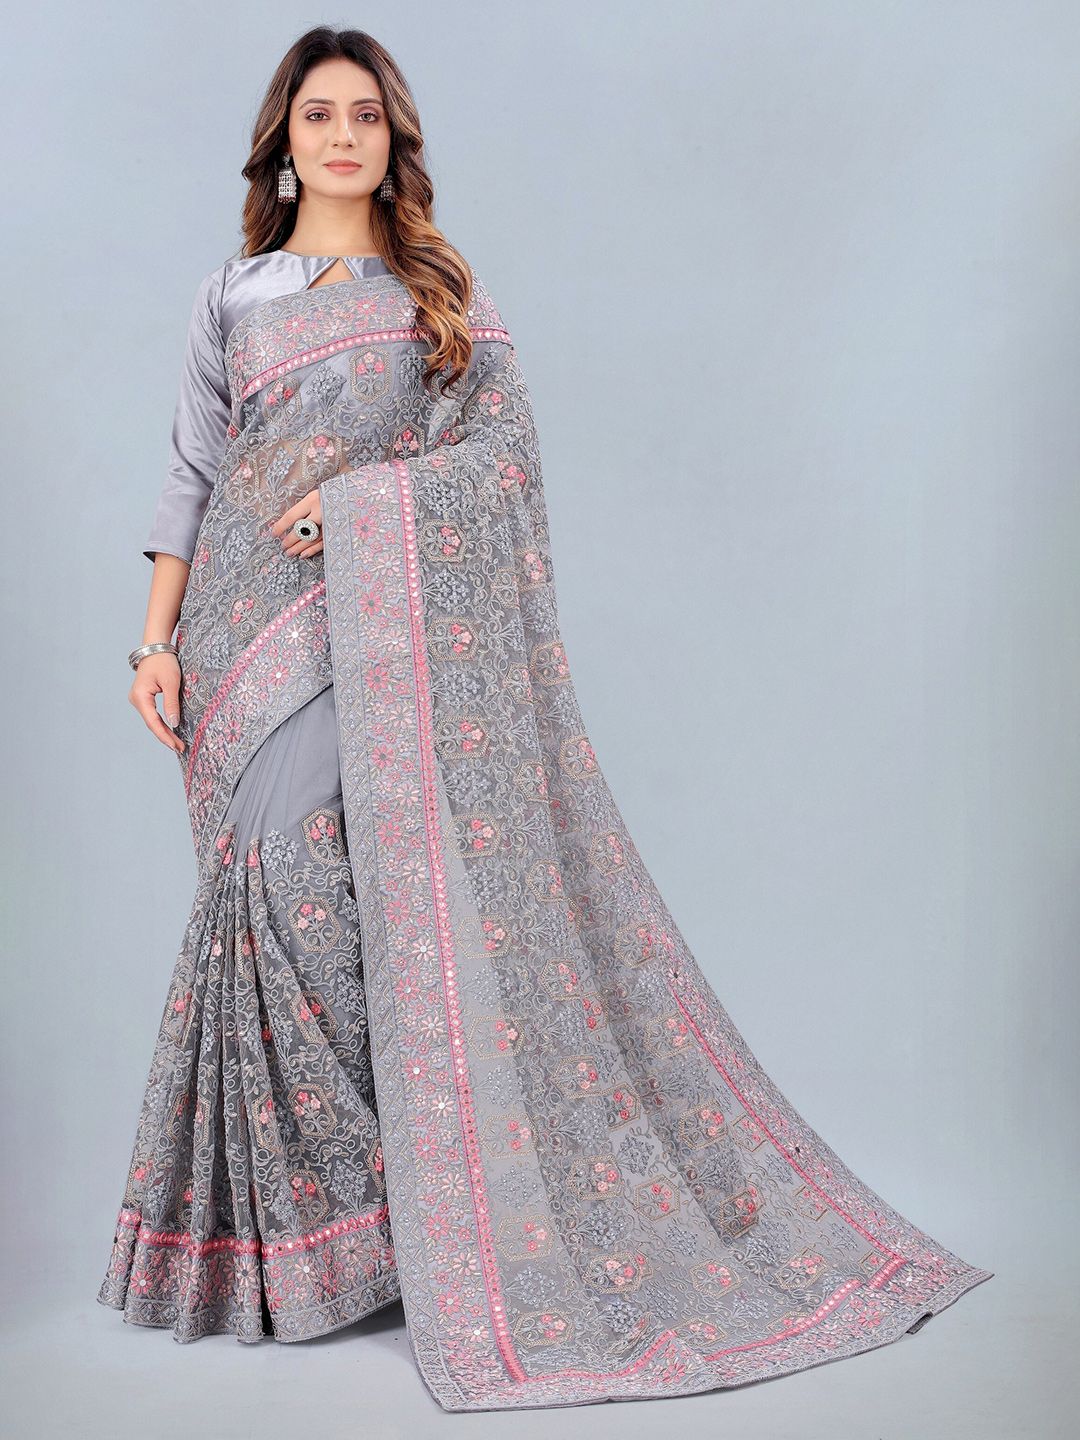 ASPORA Grey & Pink Floral Beads and Stones Net Embroidered Saree Price in India